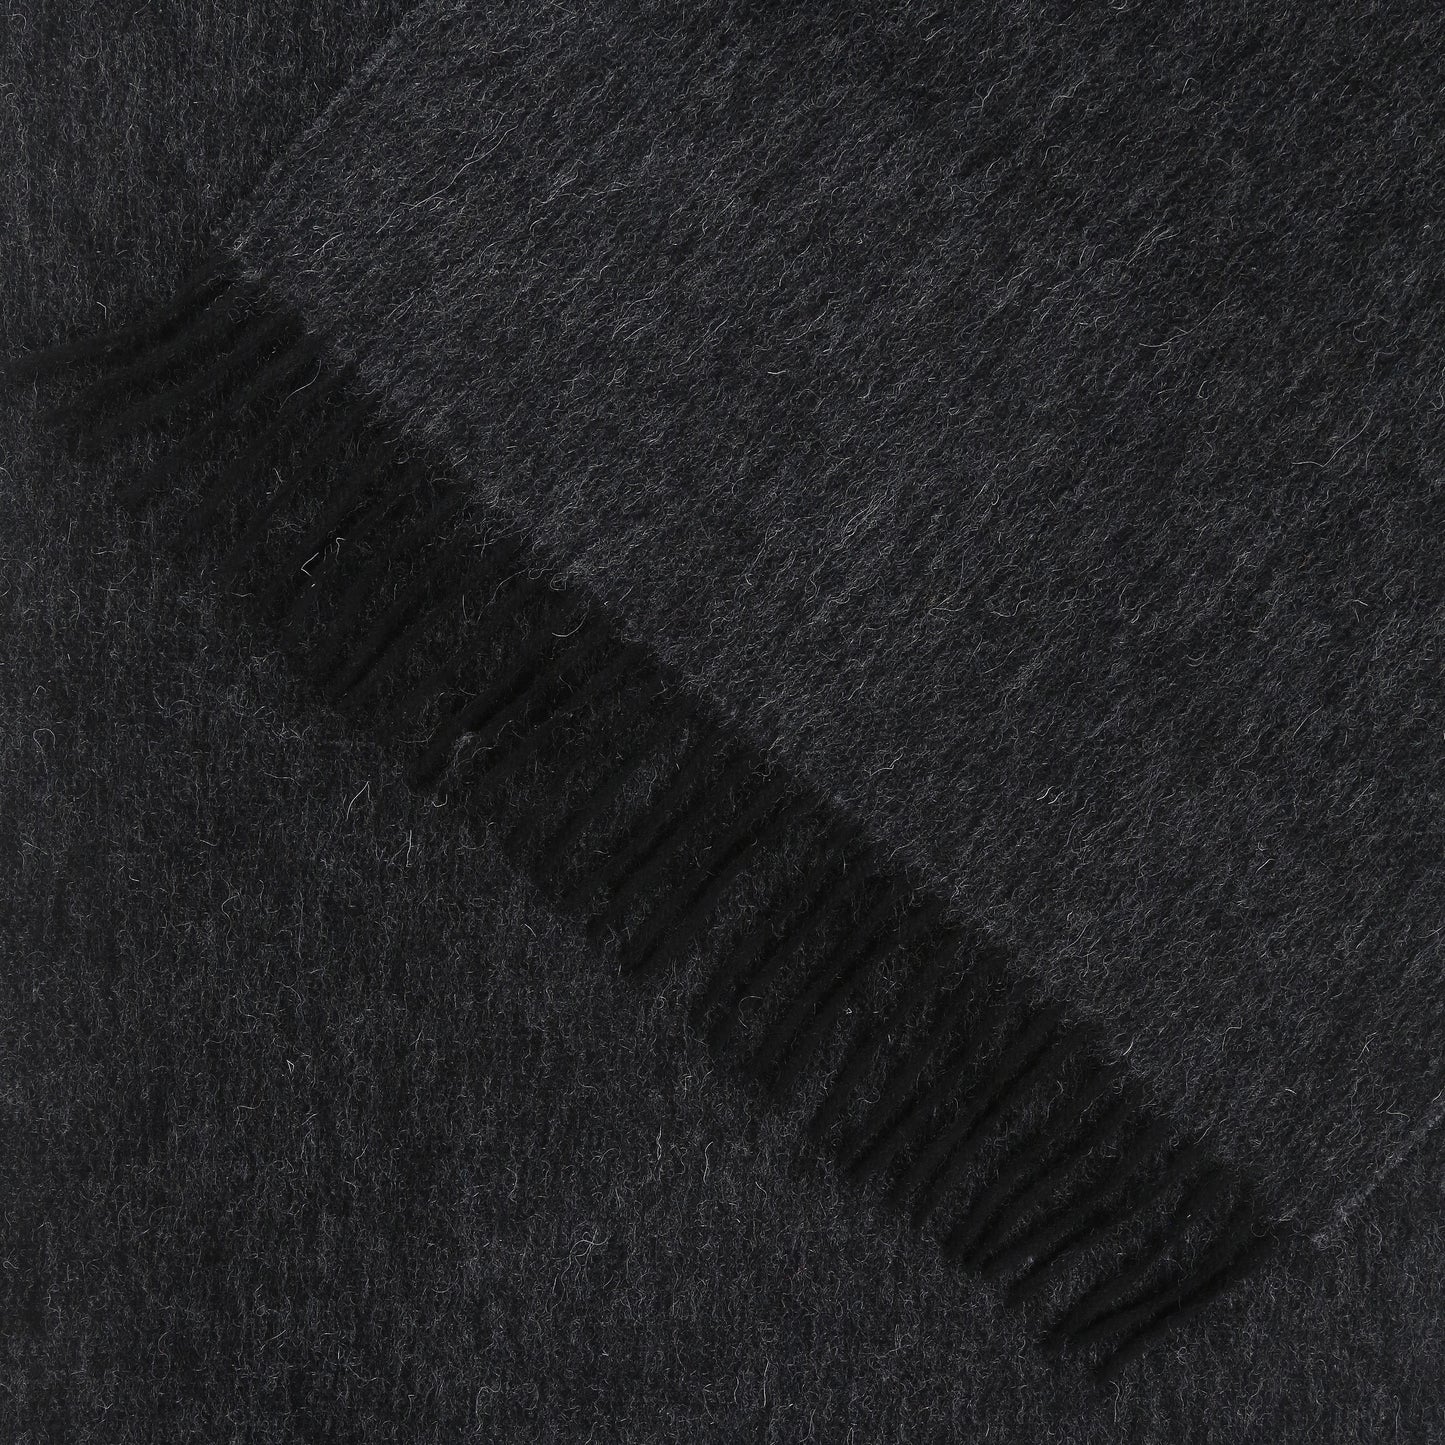 Thunderstorm Grey 100% Lambswool Long Scarf